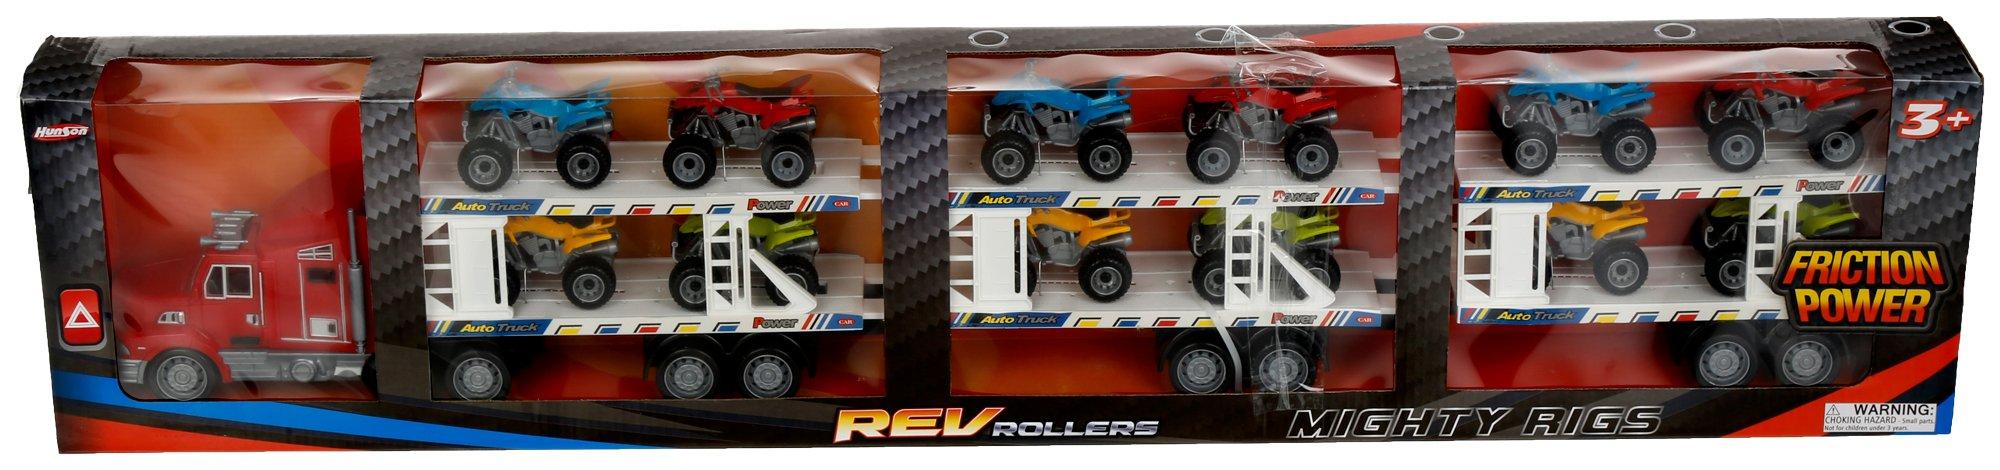 Rev Rollers Toy Vehicles